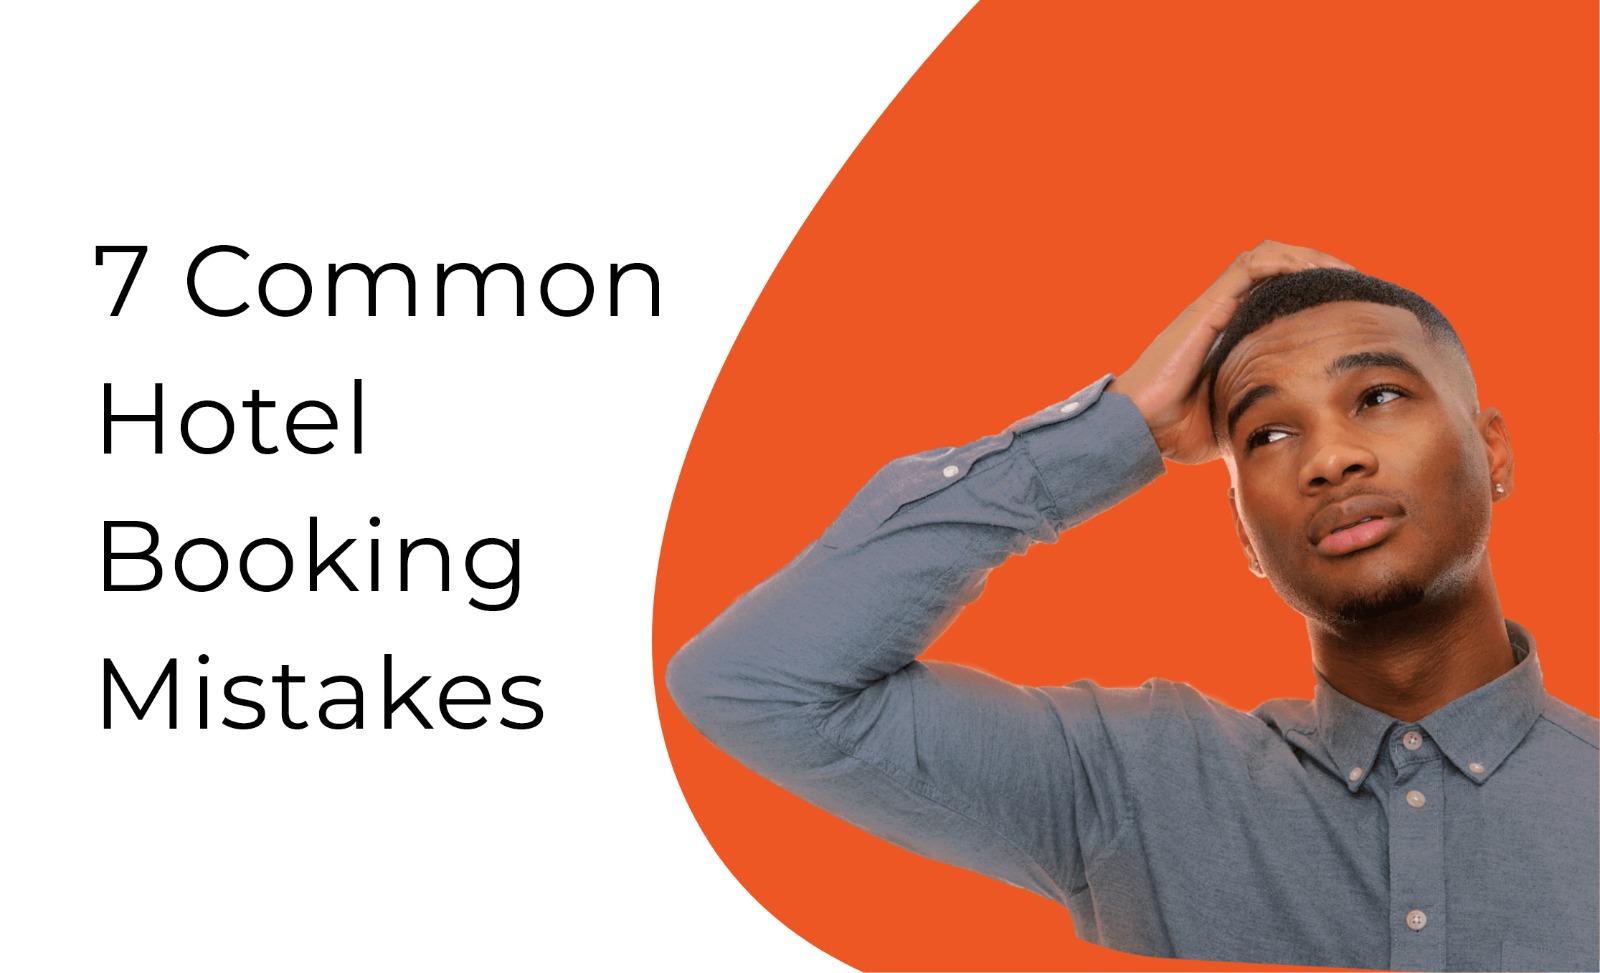 Common Hotel Booking Mistakes